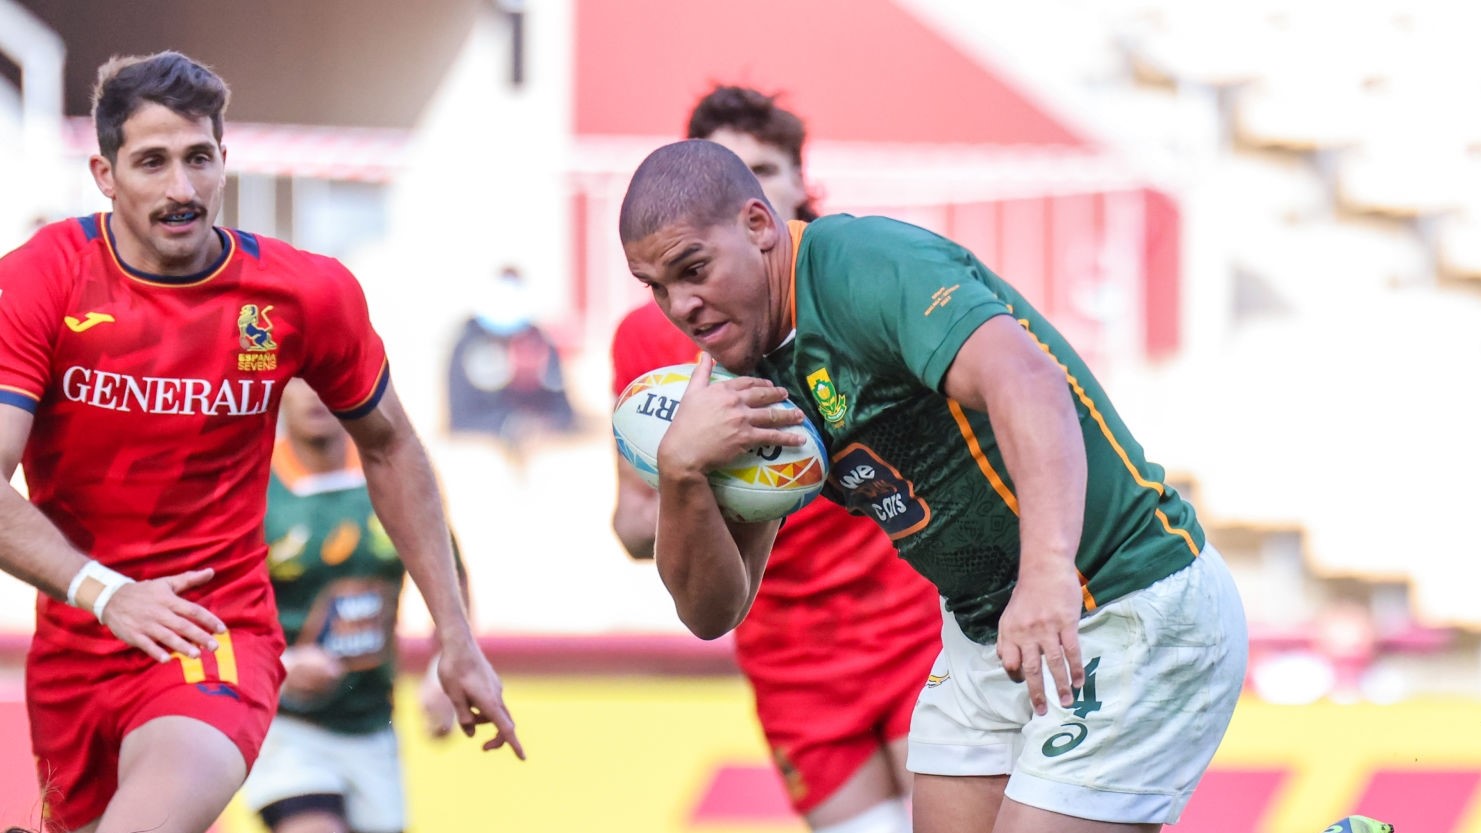 Zain Davis of South Africa in action during the Men's HSBC World Rugby Sevens Series 2022 match between Spain and South Africa at the La Cartuja stadium in Seville, on January 29, 2022. (Photo by DAX Images/NurPhoto via Getty Images)